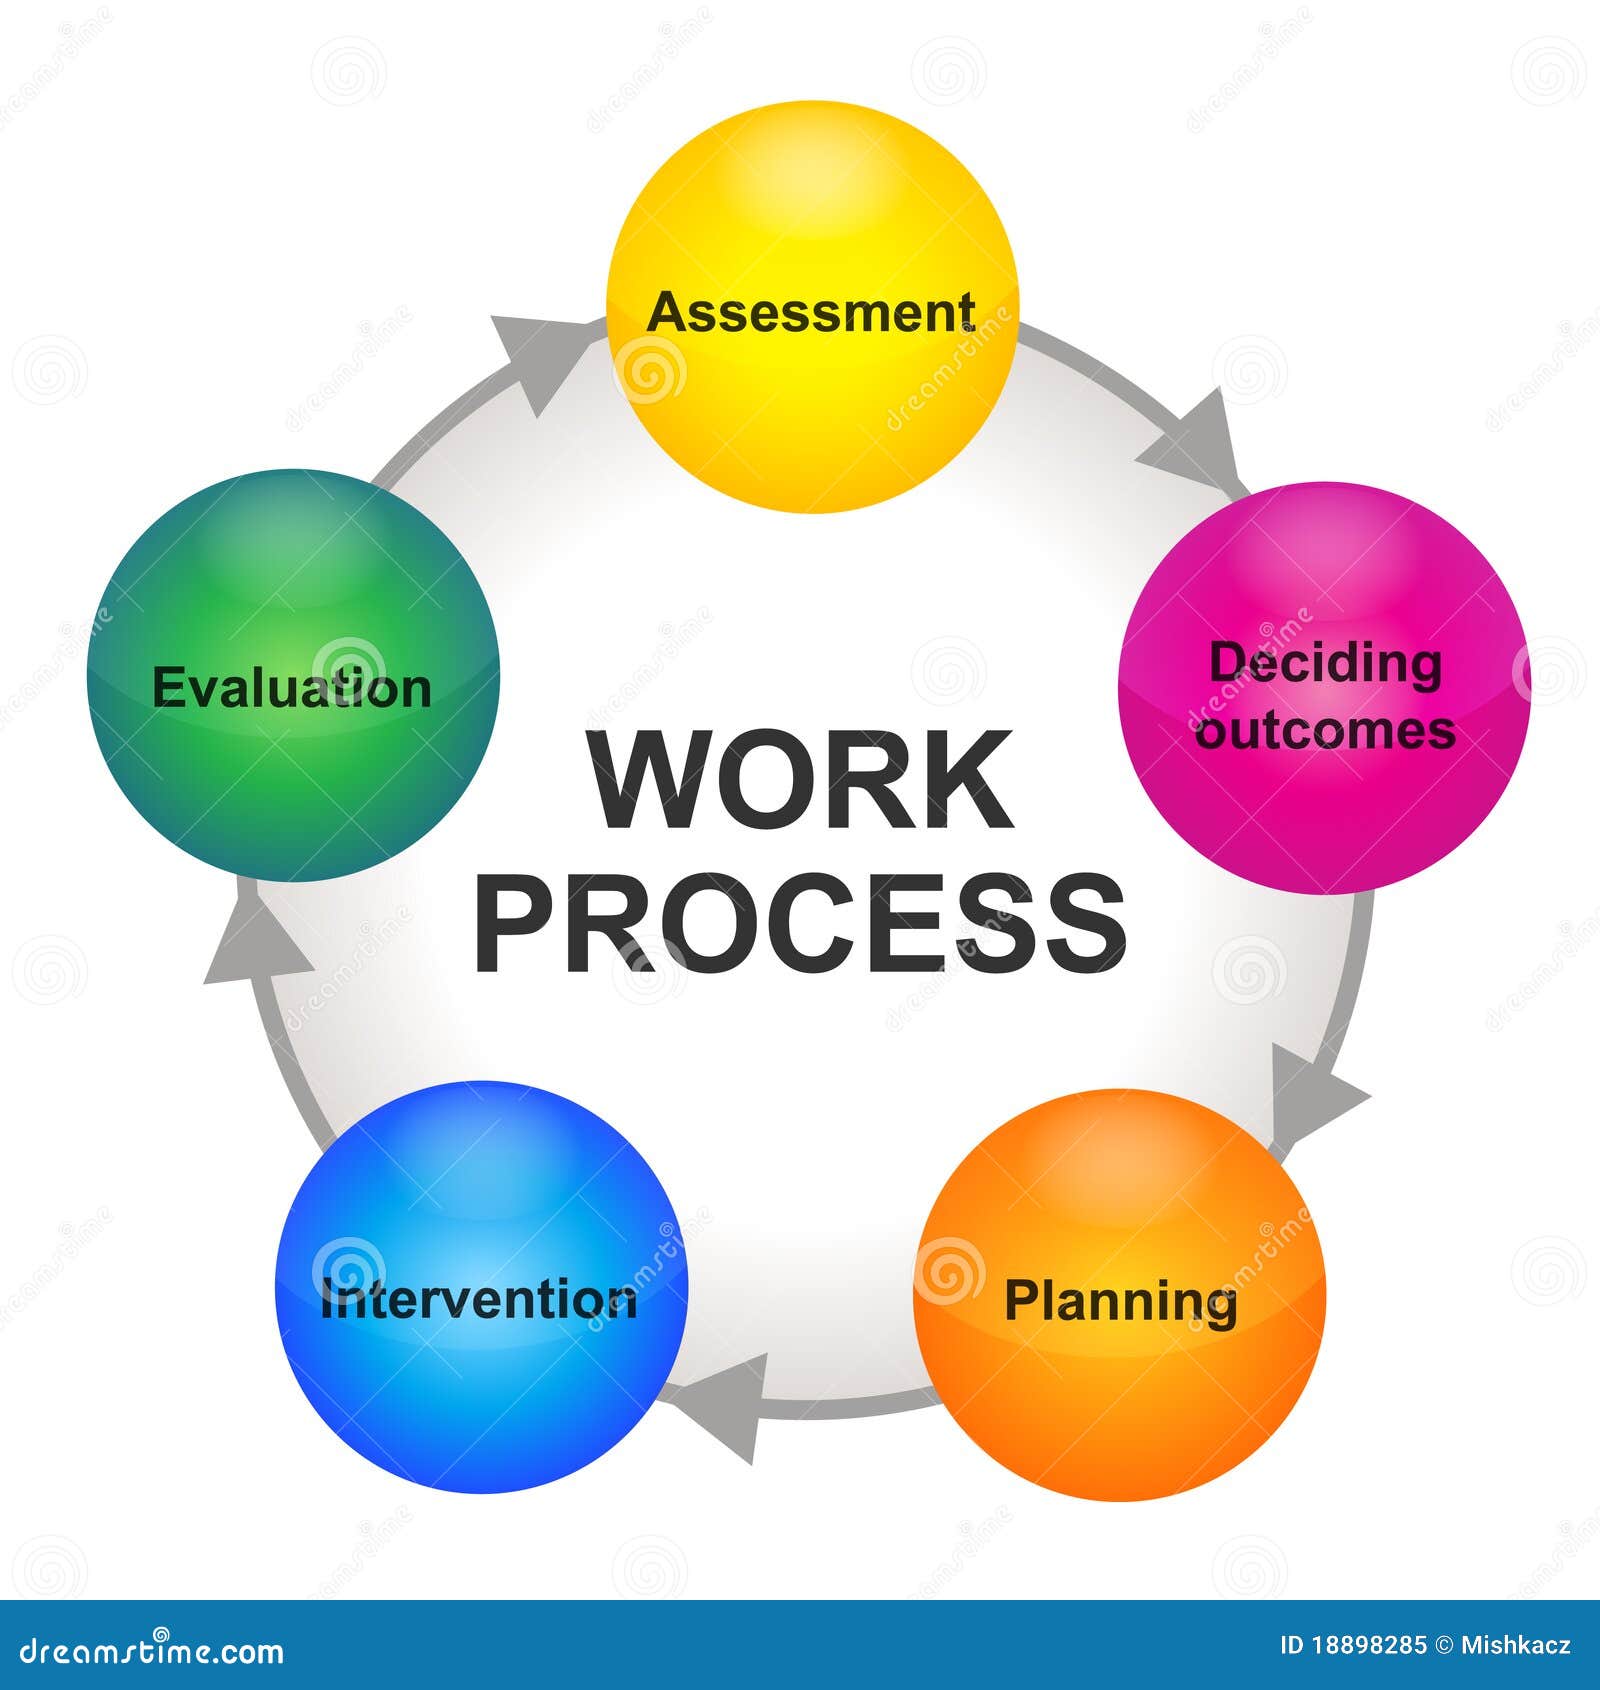 Literature review of business process improvement